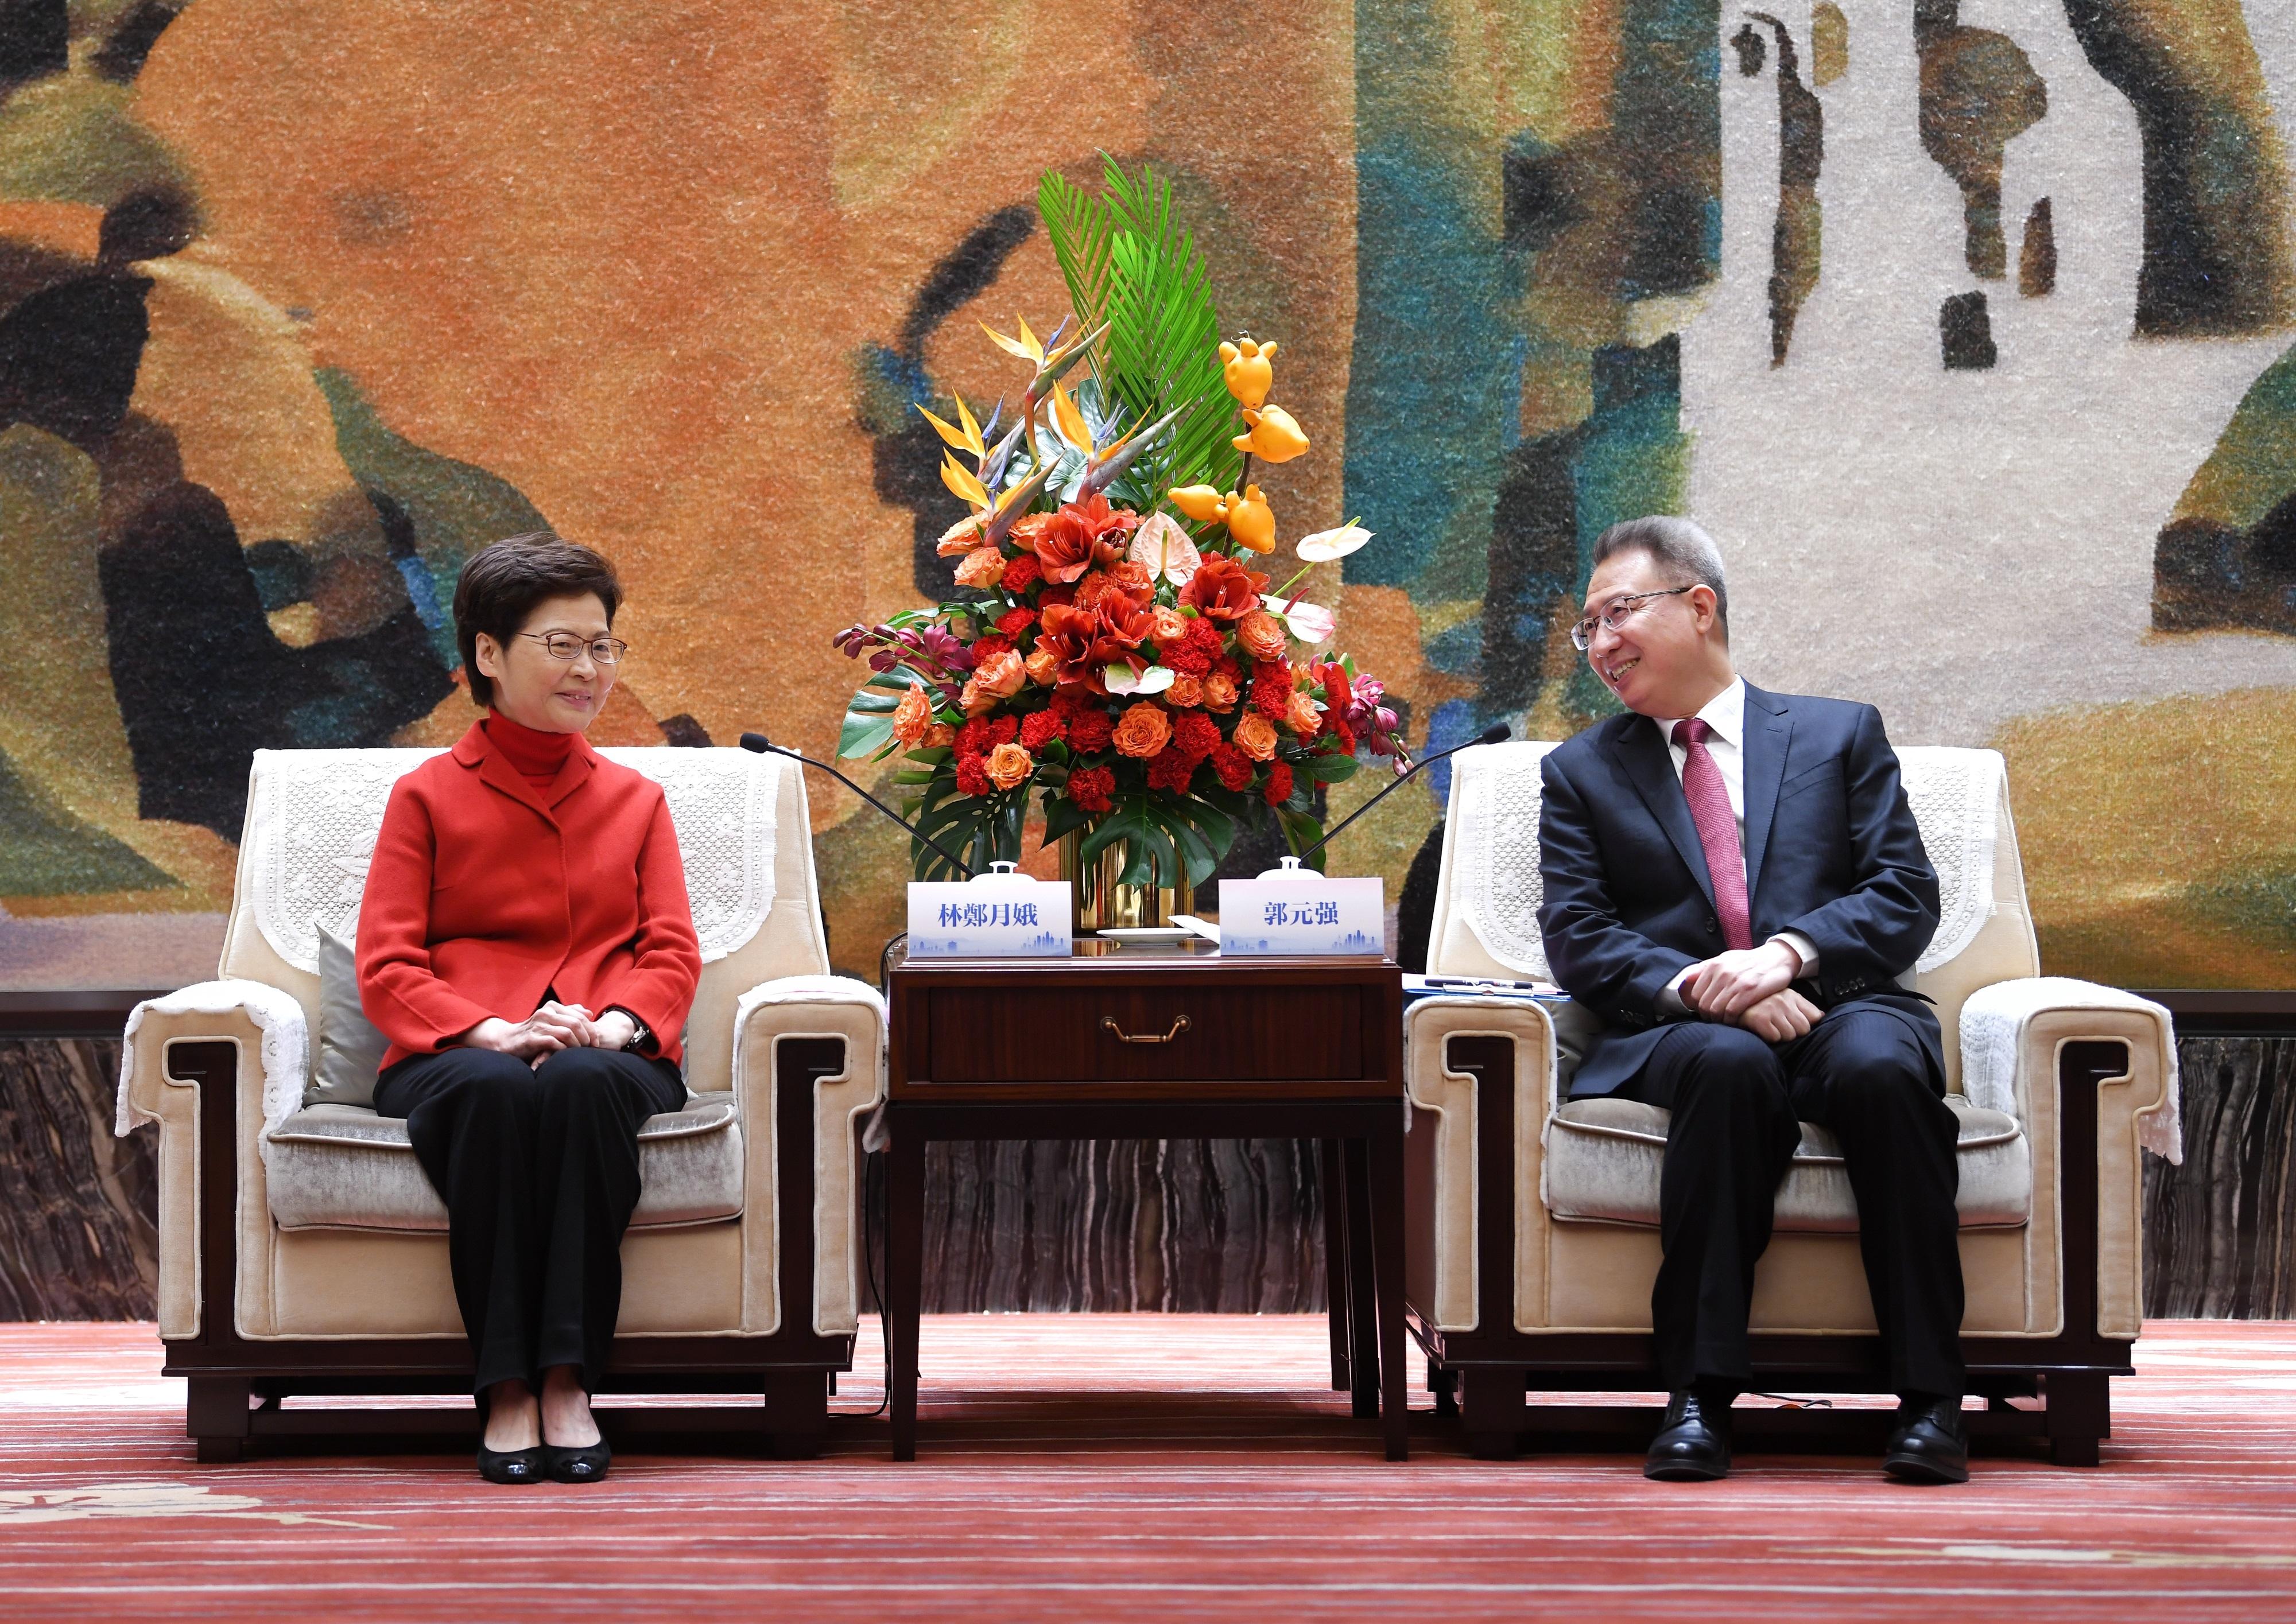 The Chief Executive, Mrs Carrie Lam, continued her visit to Wuhan in Hubei Province today (November 30). Photo shows Mrs Lam (left) meeting with the Secretary of the CPC Wuhan Municipal Committee, Mr Guo Yuanqiang (right).